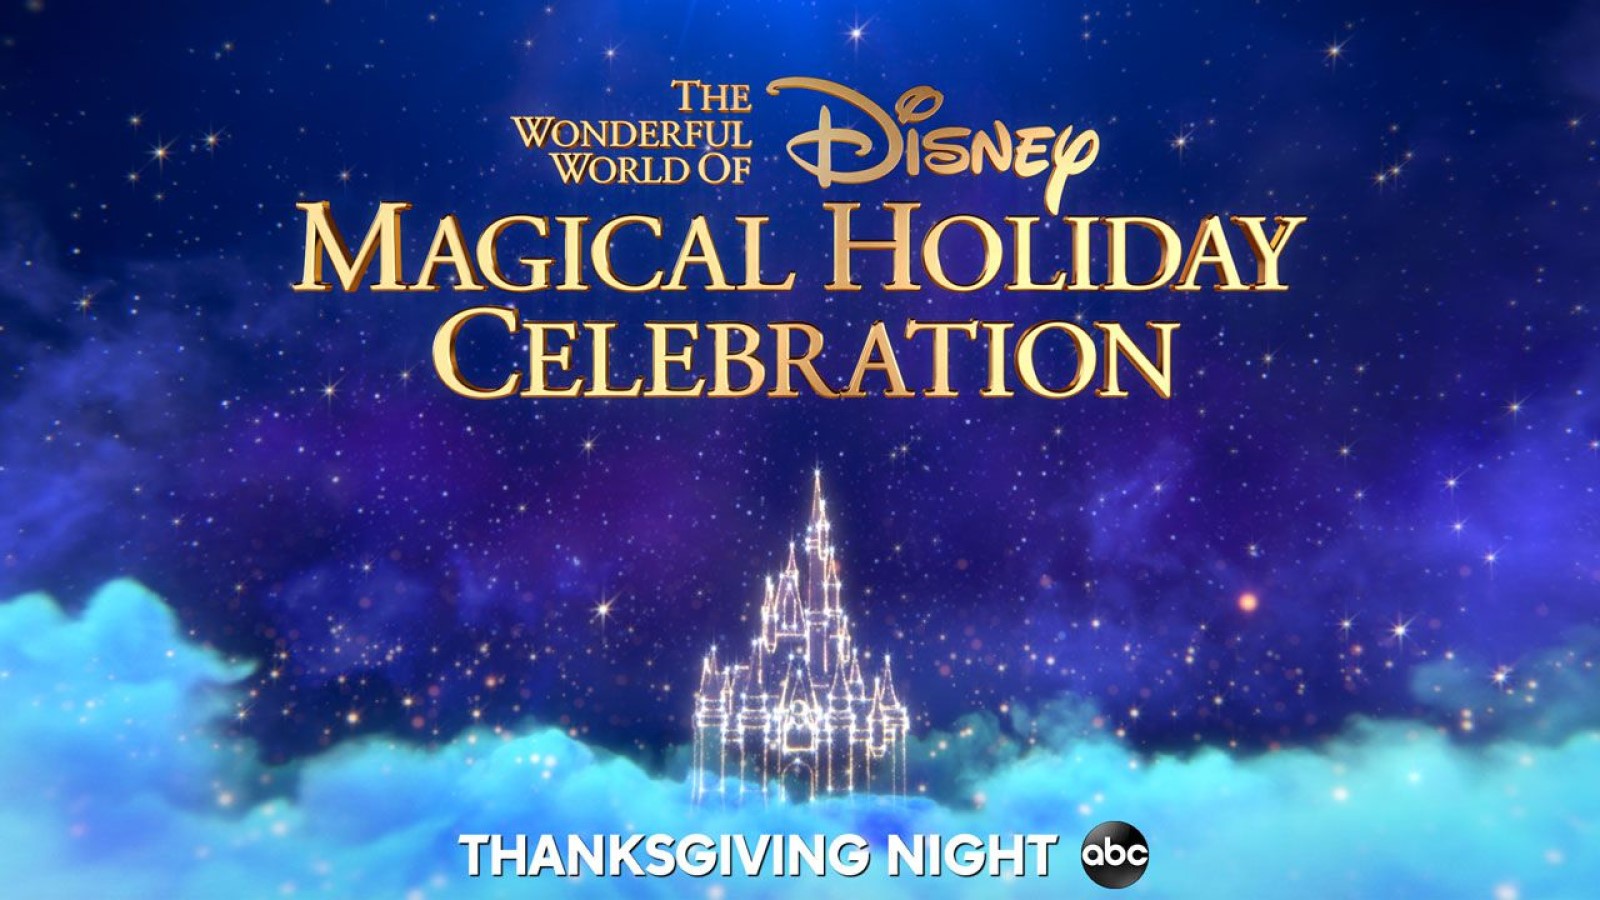 How to Watch ‘The Wonderful World of Disney Magical Holiday